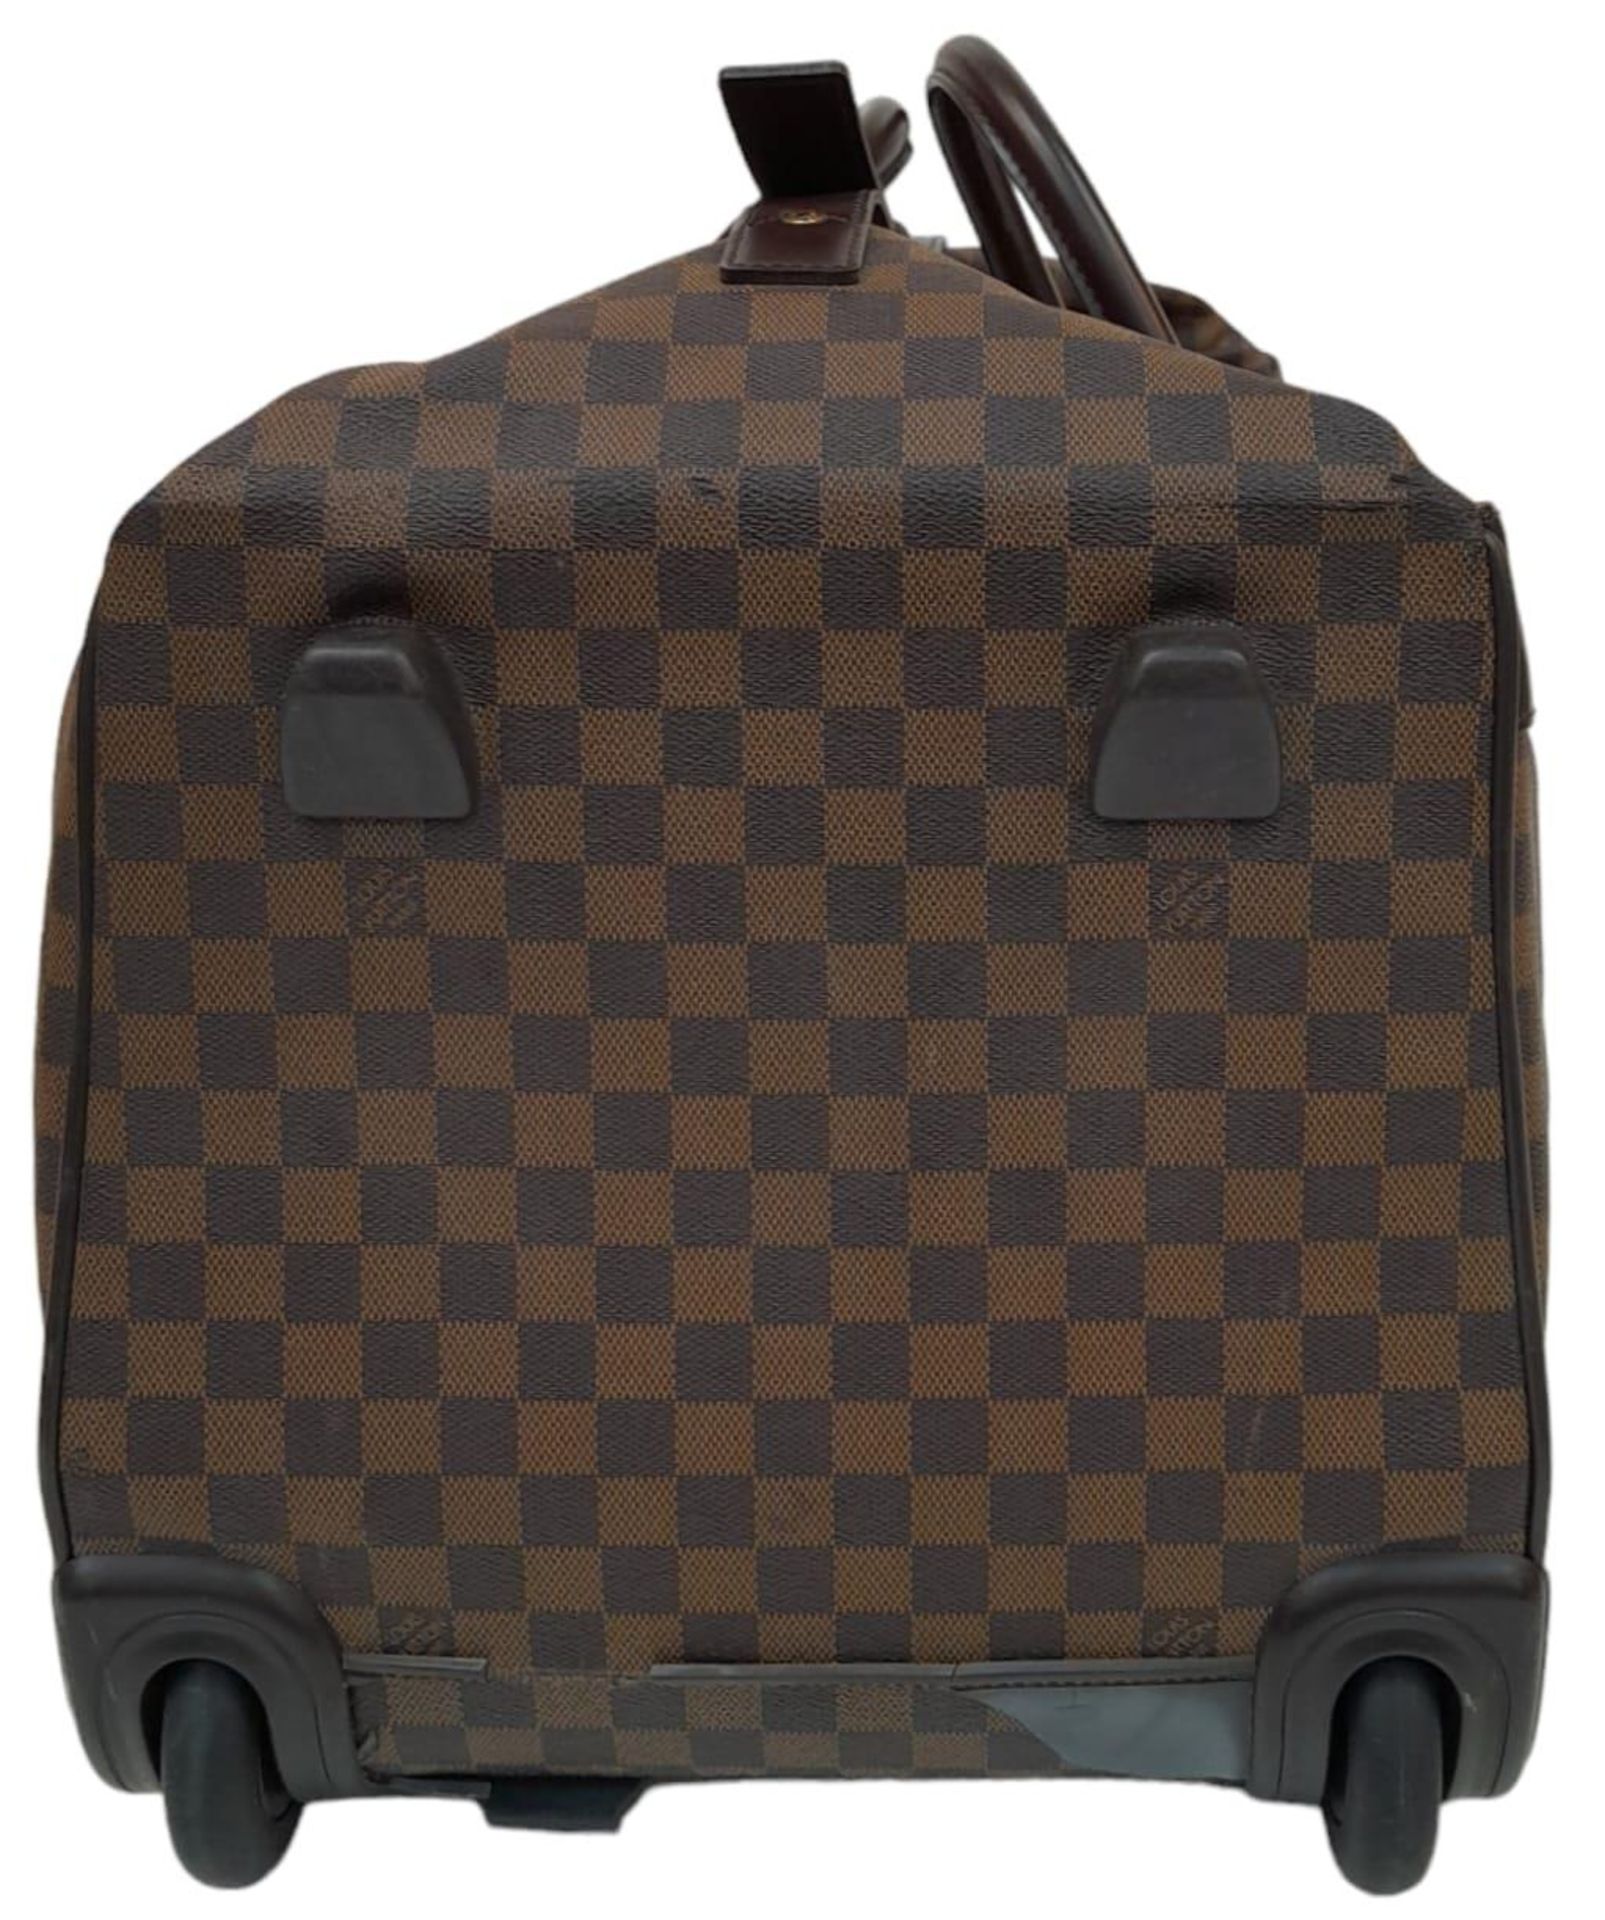 A Louis Vuitton Damier Ebene Eole Convertible Travel Bag. Leather exterior with gold-toned hardware, - Image 3 of 13